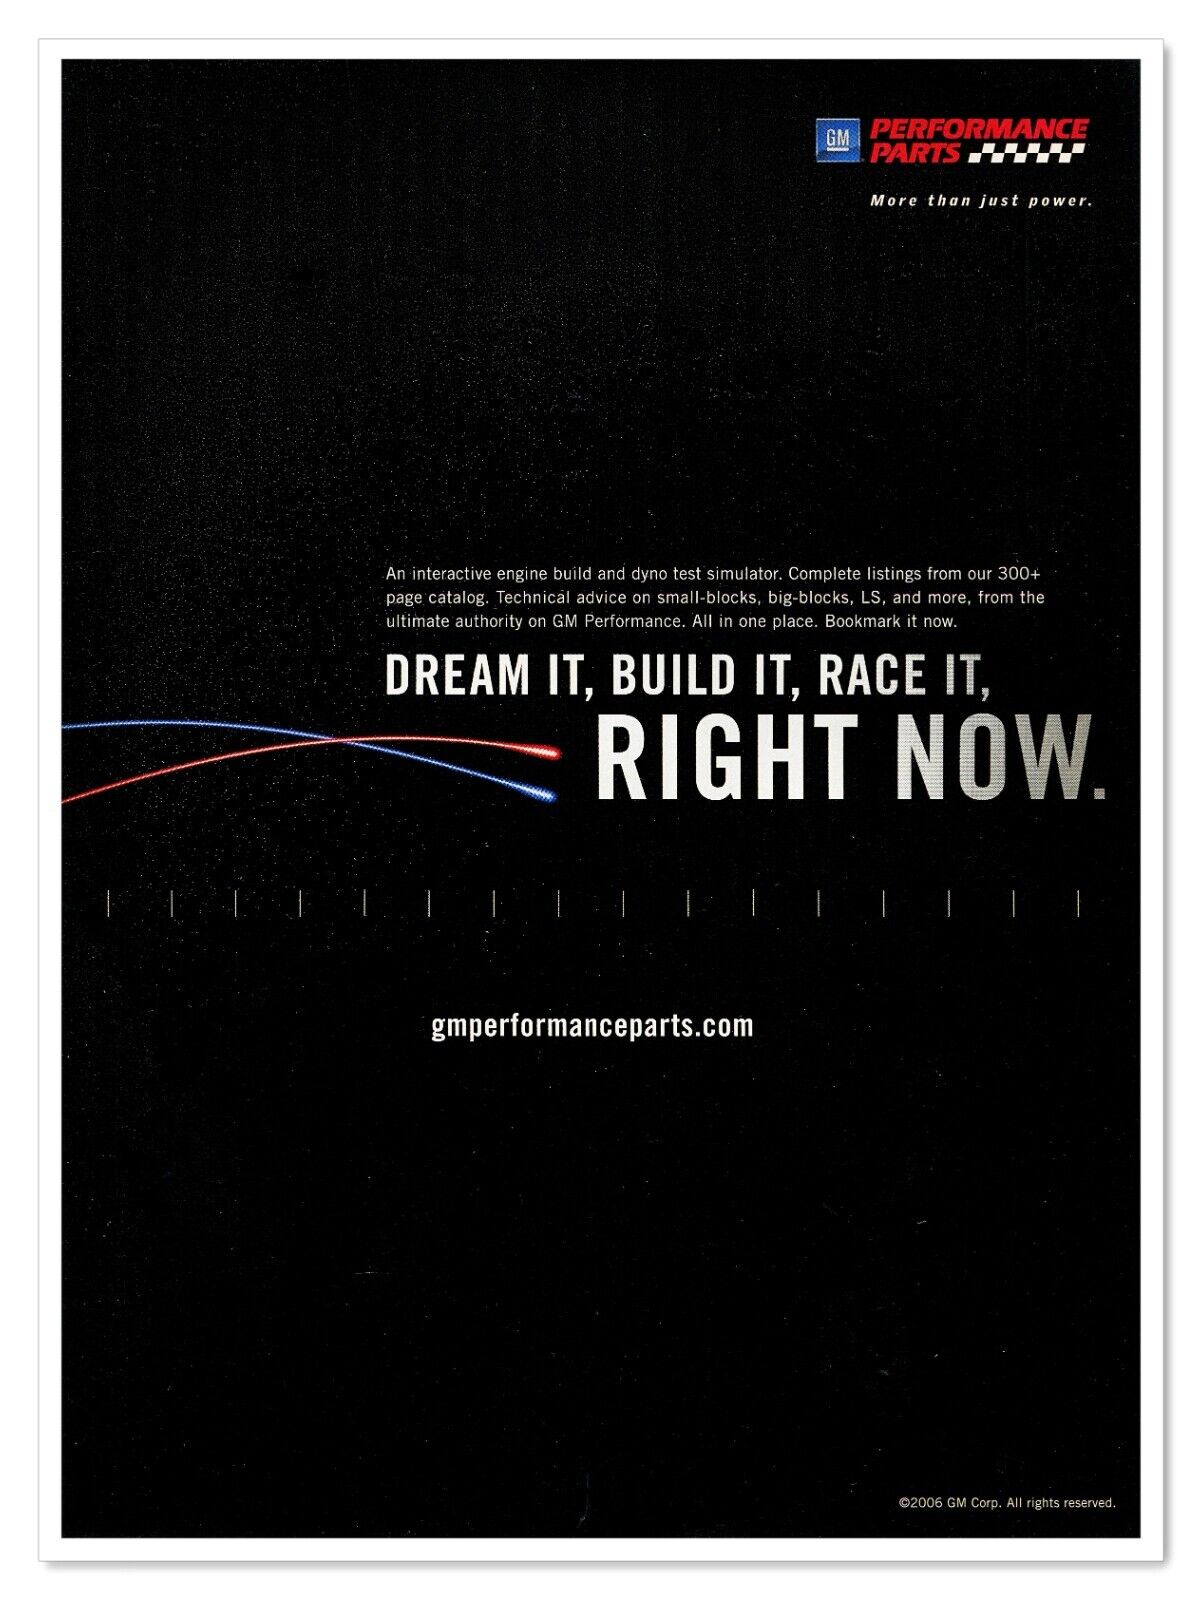 GM Performance Parts Website Dream Build Race 2007 Full-Page Print Magazine Ad